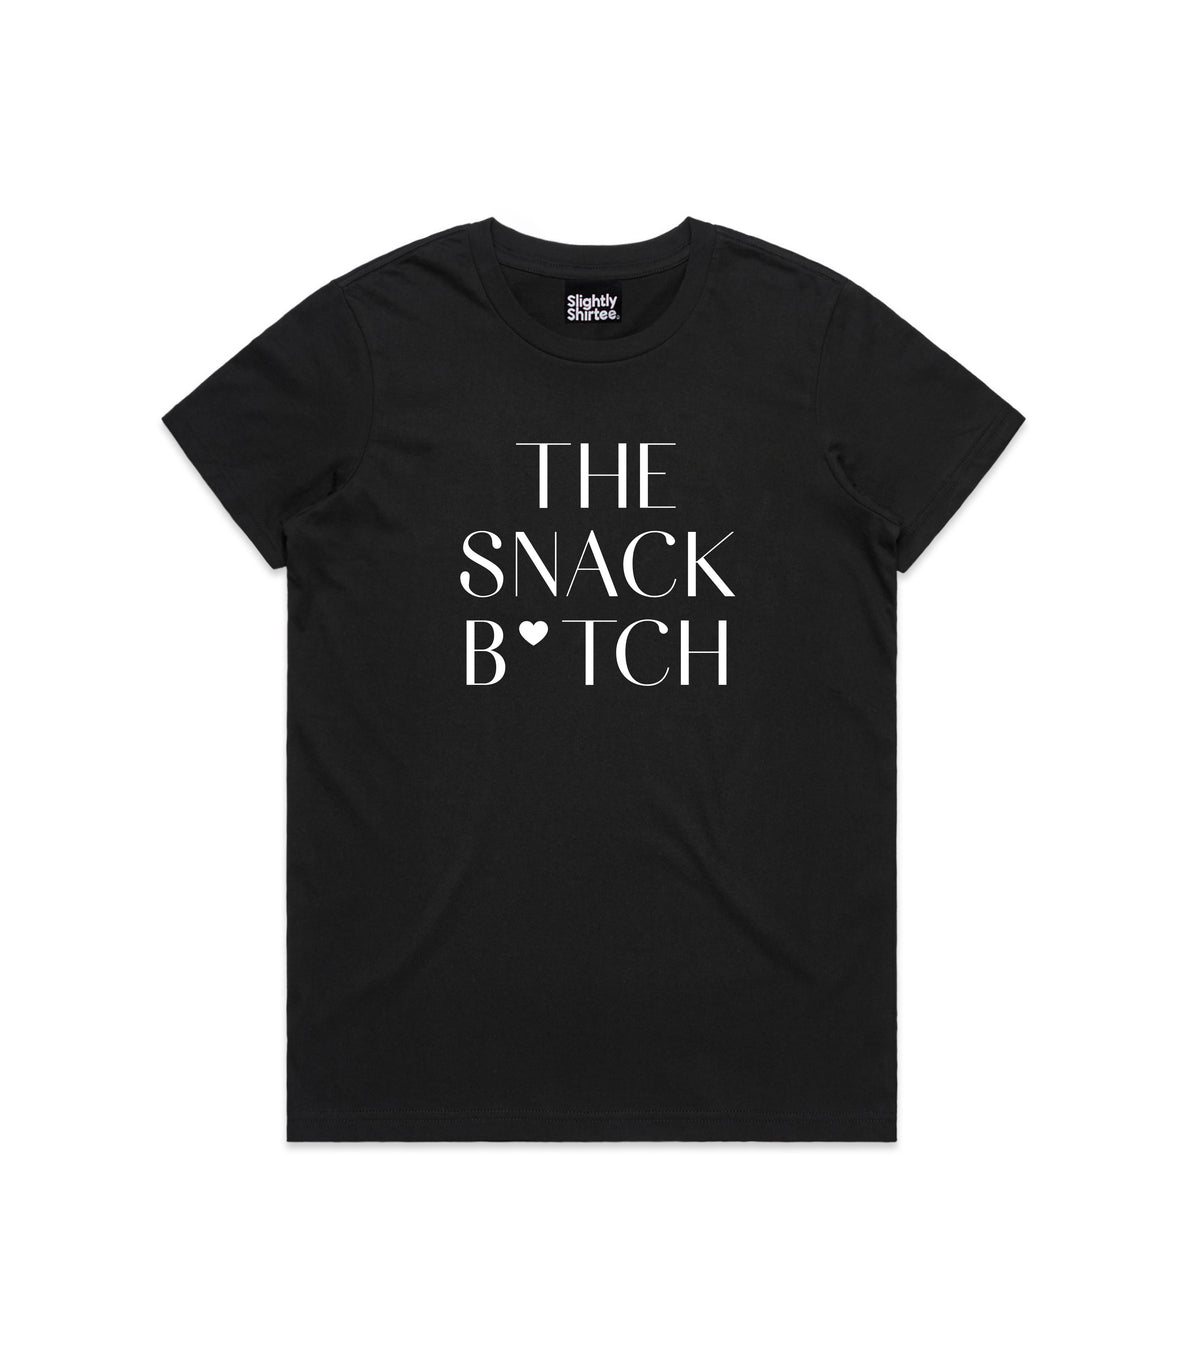 The Snack Bitch Tee